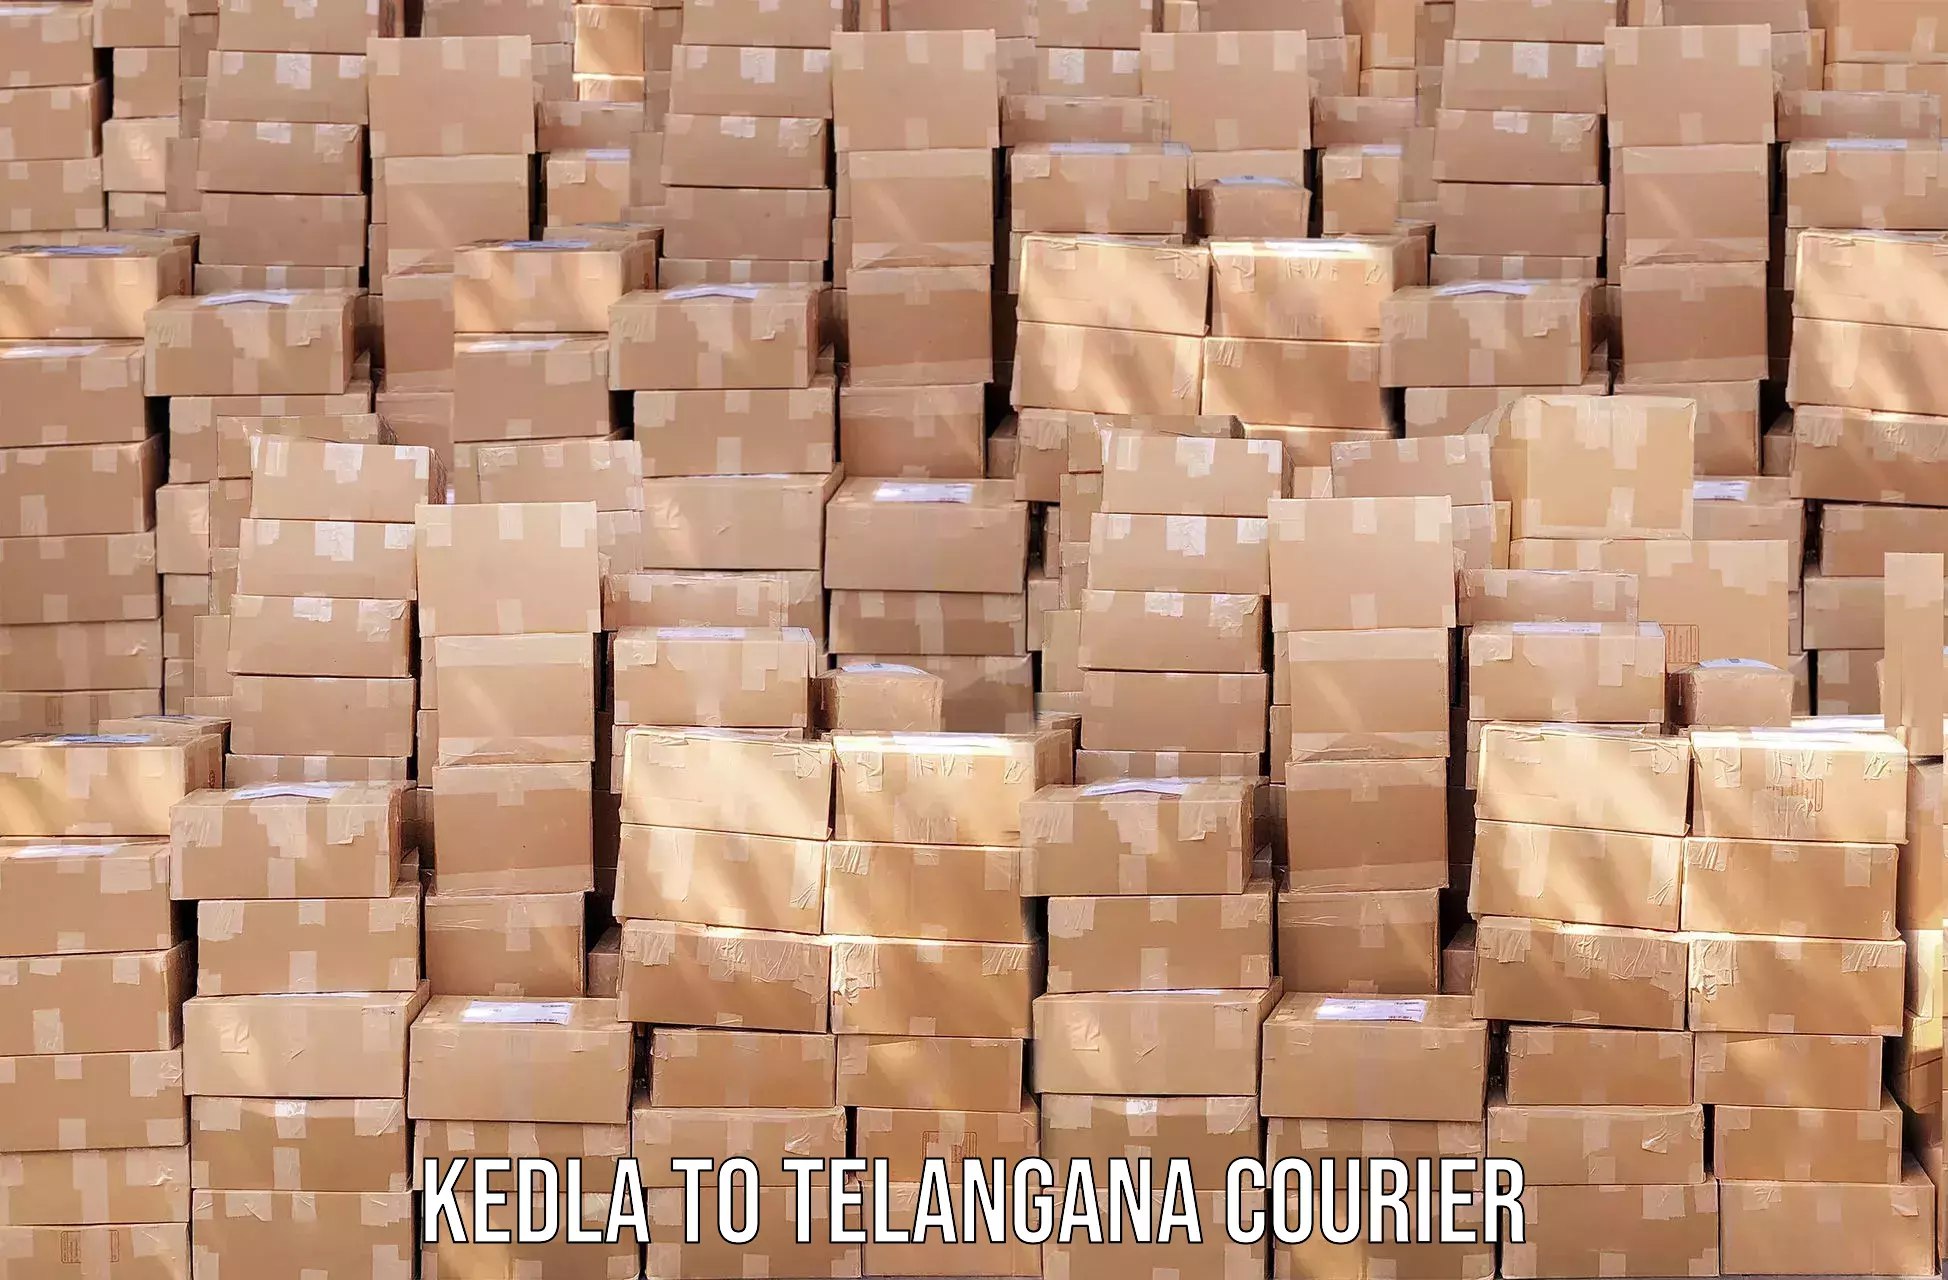 User-friendly delivery service Kedla to Telangana